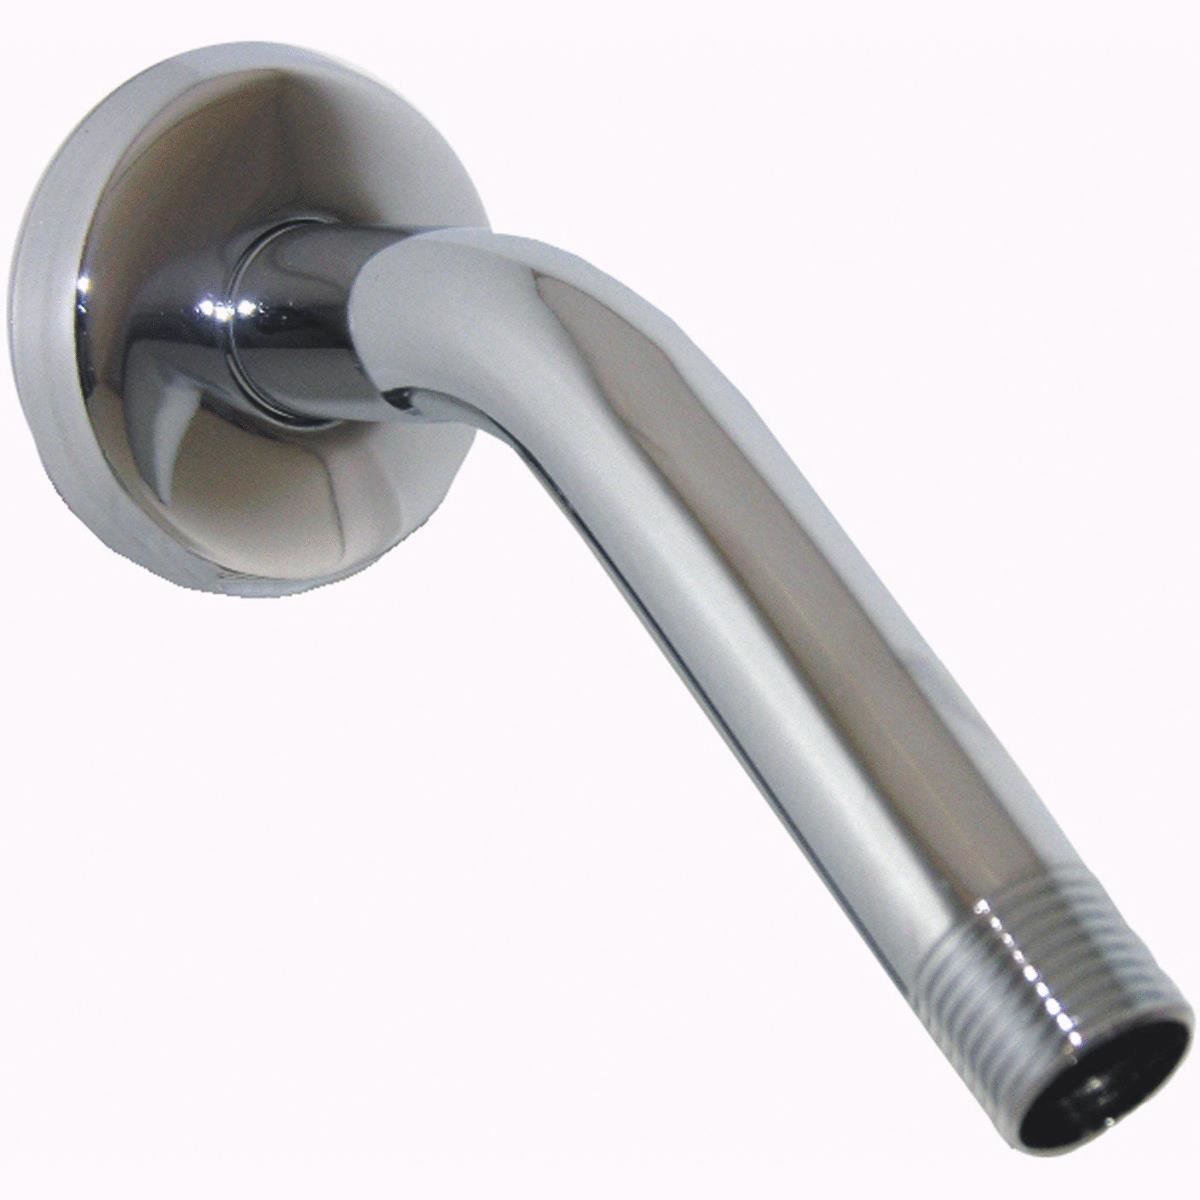 Lasco 08-2453 Shower Arm with Wall Flange, Chrome Plated, 1/2" x 8"